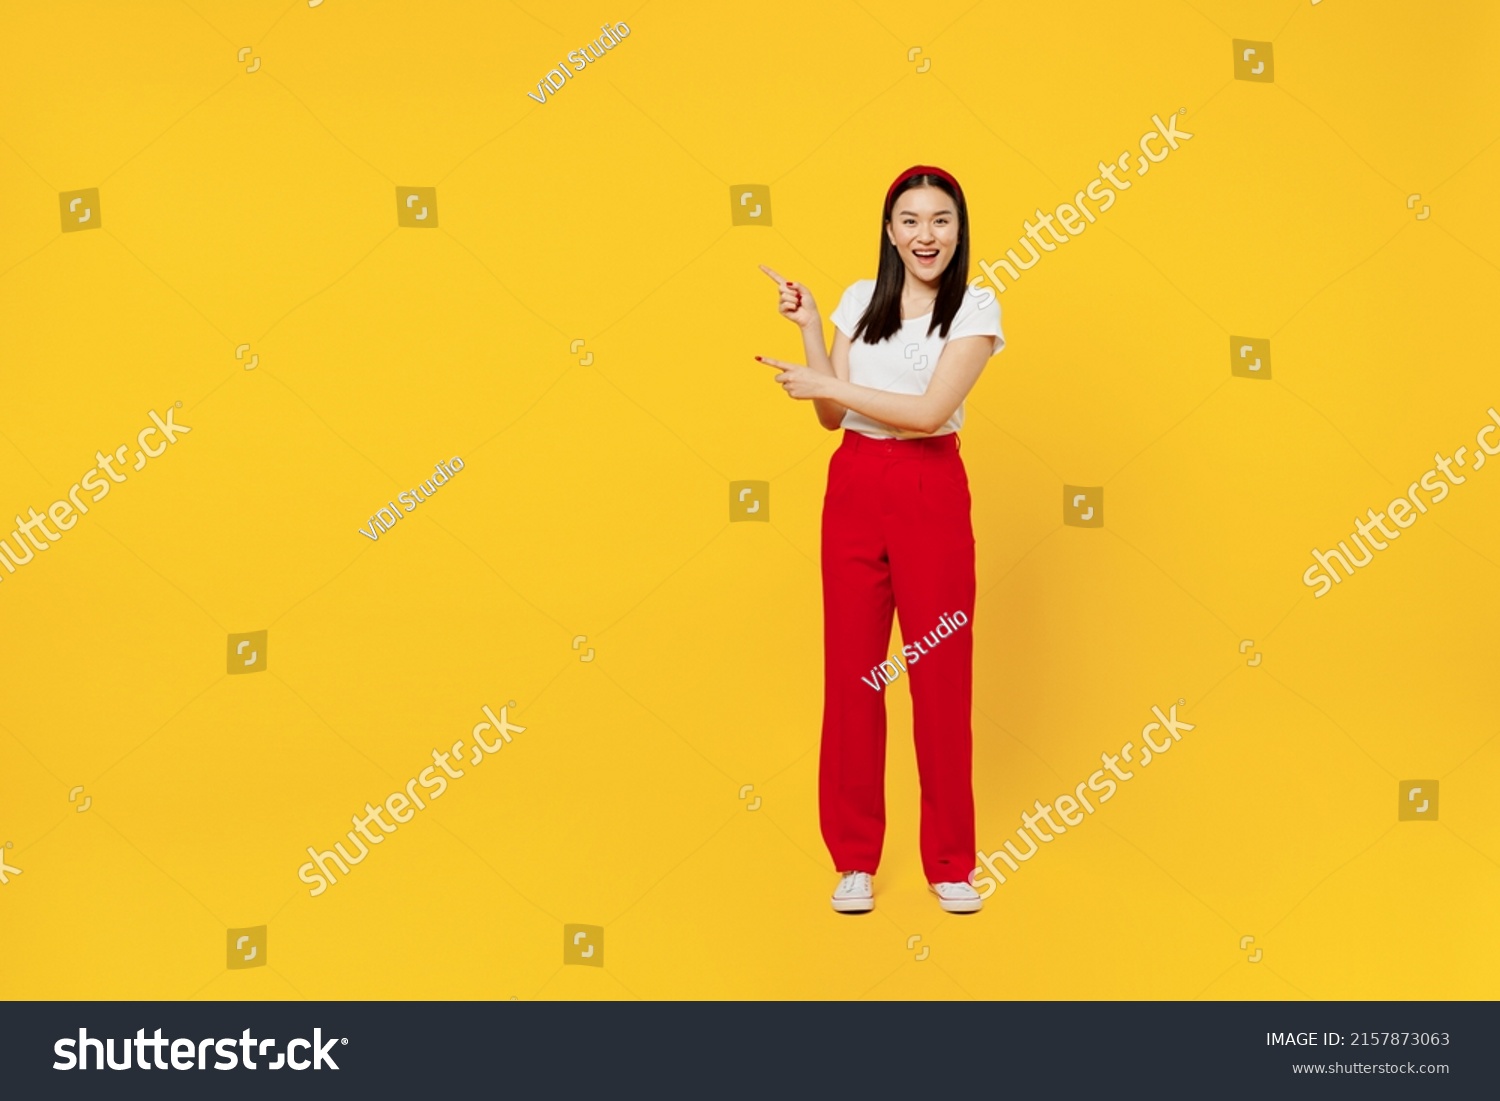 Full size body length promoter young woman of Asian ethnicity 20s years old in casual clothes point aside on workspace area copy space mock up isolated on plain yellow background studio portrait #2157873063